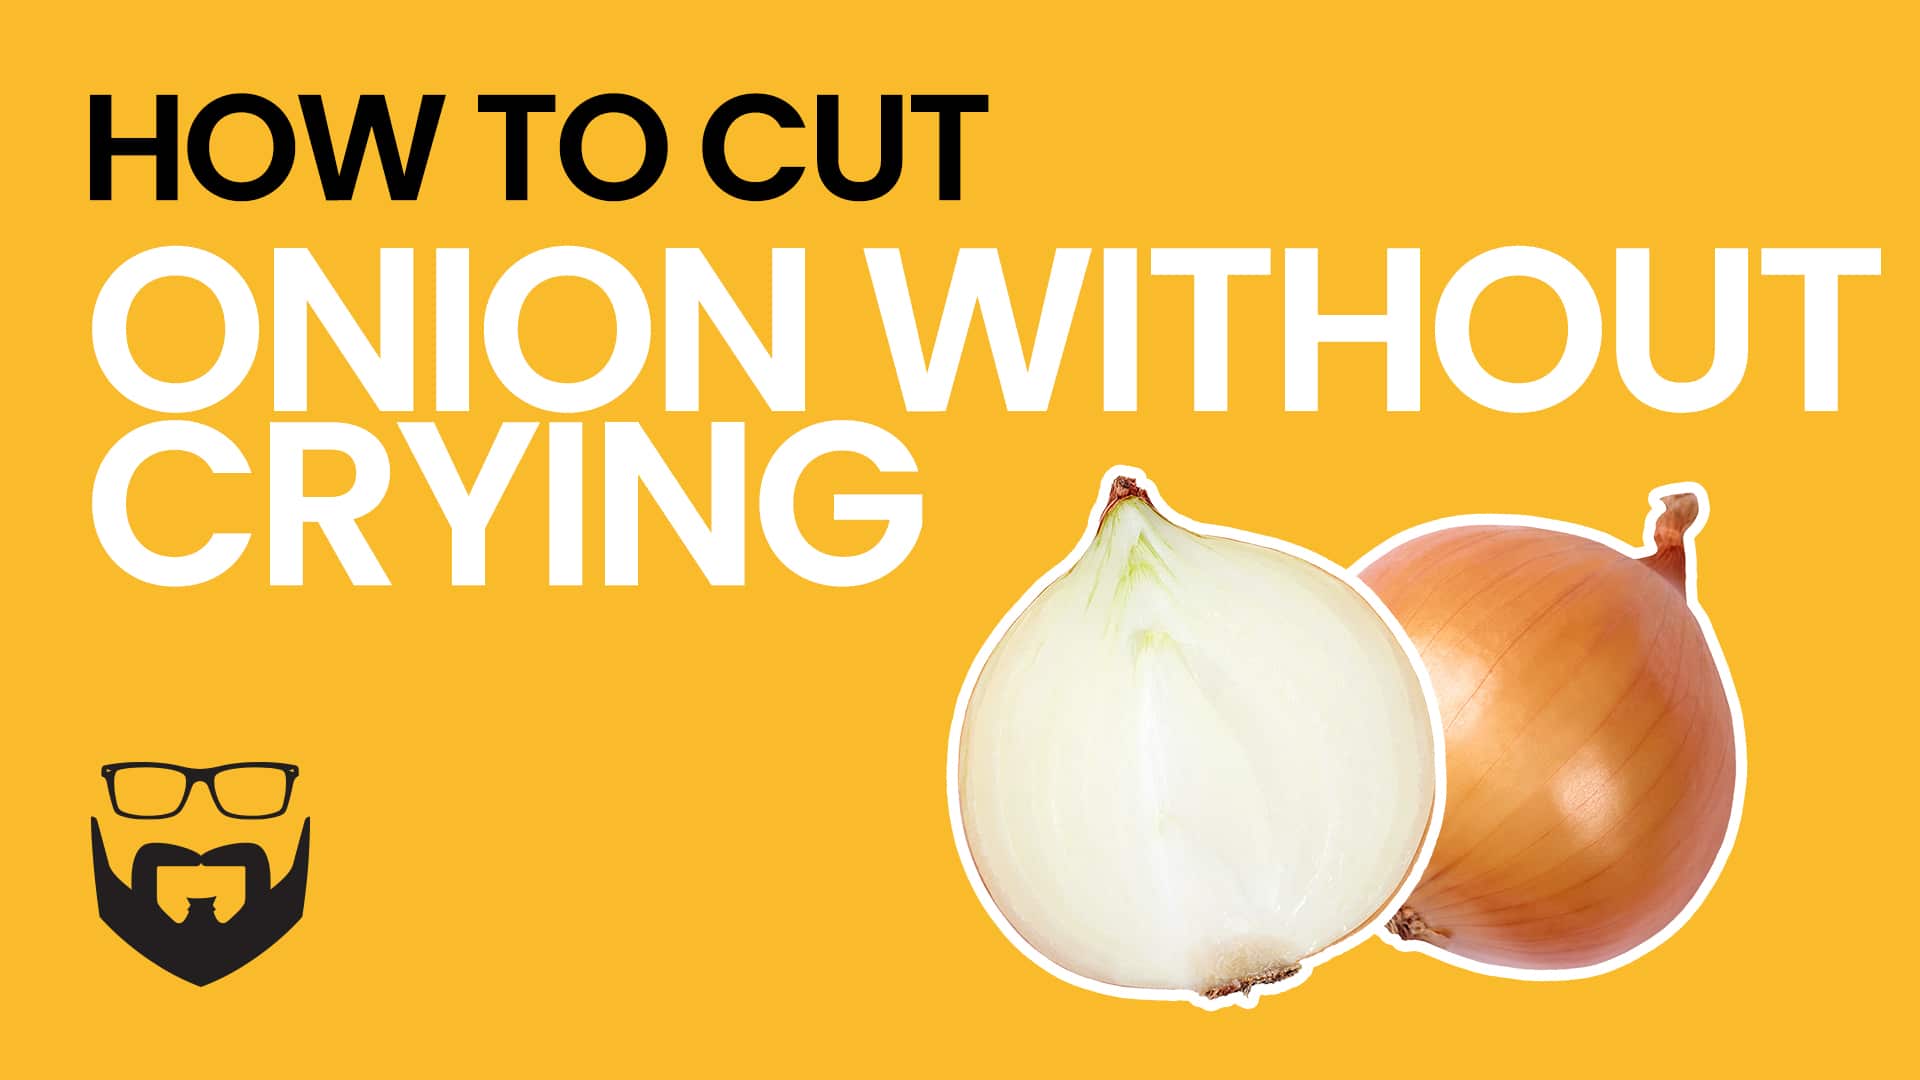 https://jerryjamesstone.com/wp-content/uploads/2023/01/How-to-Cut-Onion-Without-Crying-Video-Yellow.jpg